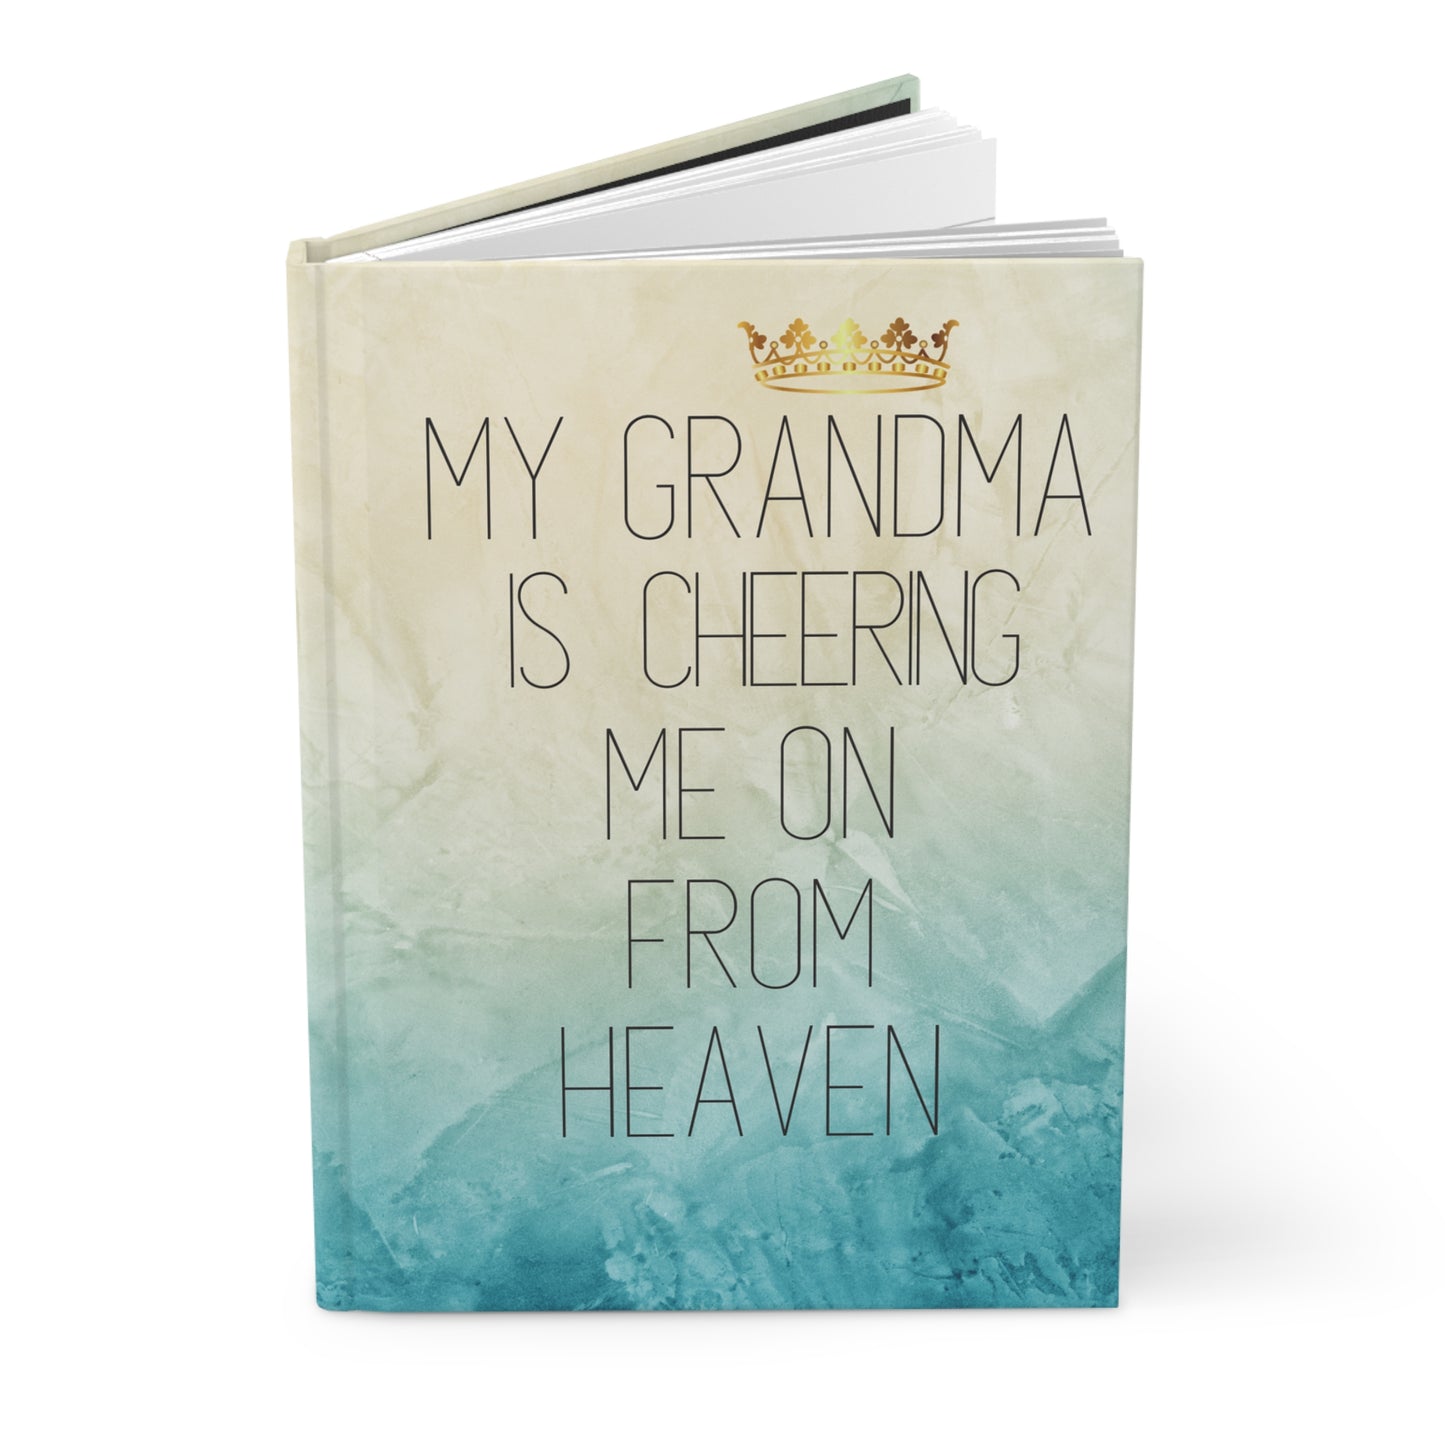 Grief Journal for Loss of Grandma, Cheering Me On From Heaven